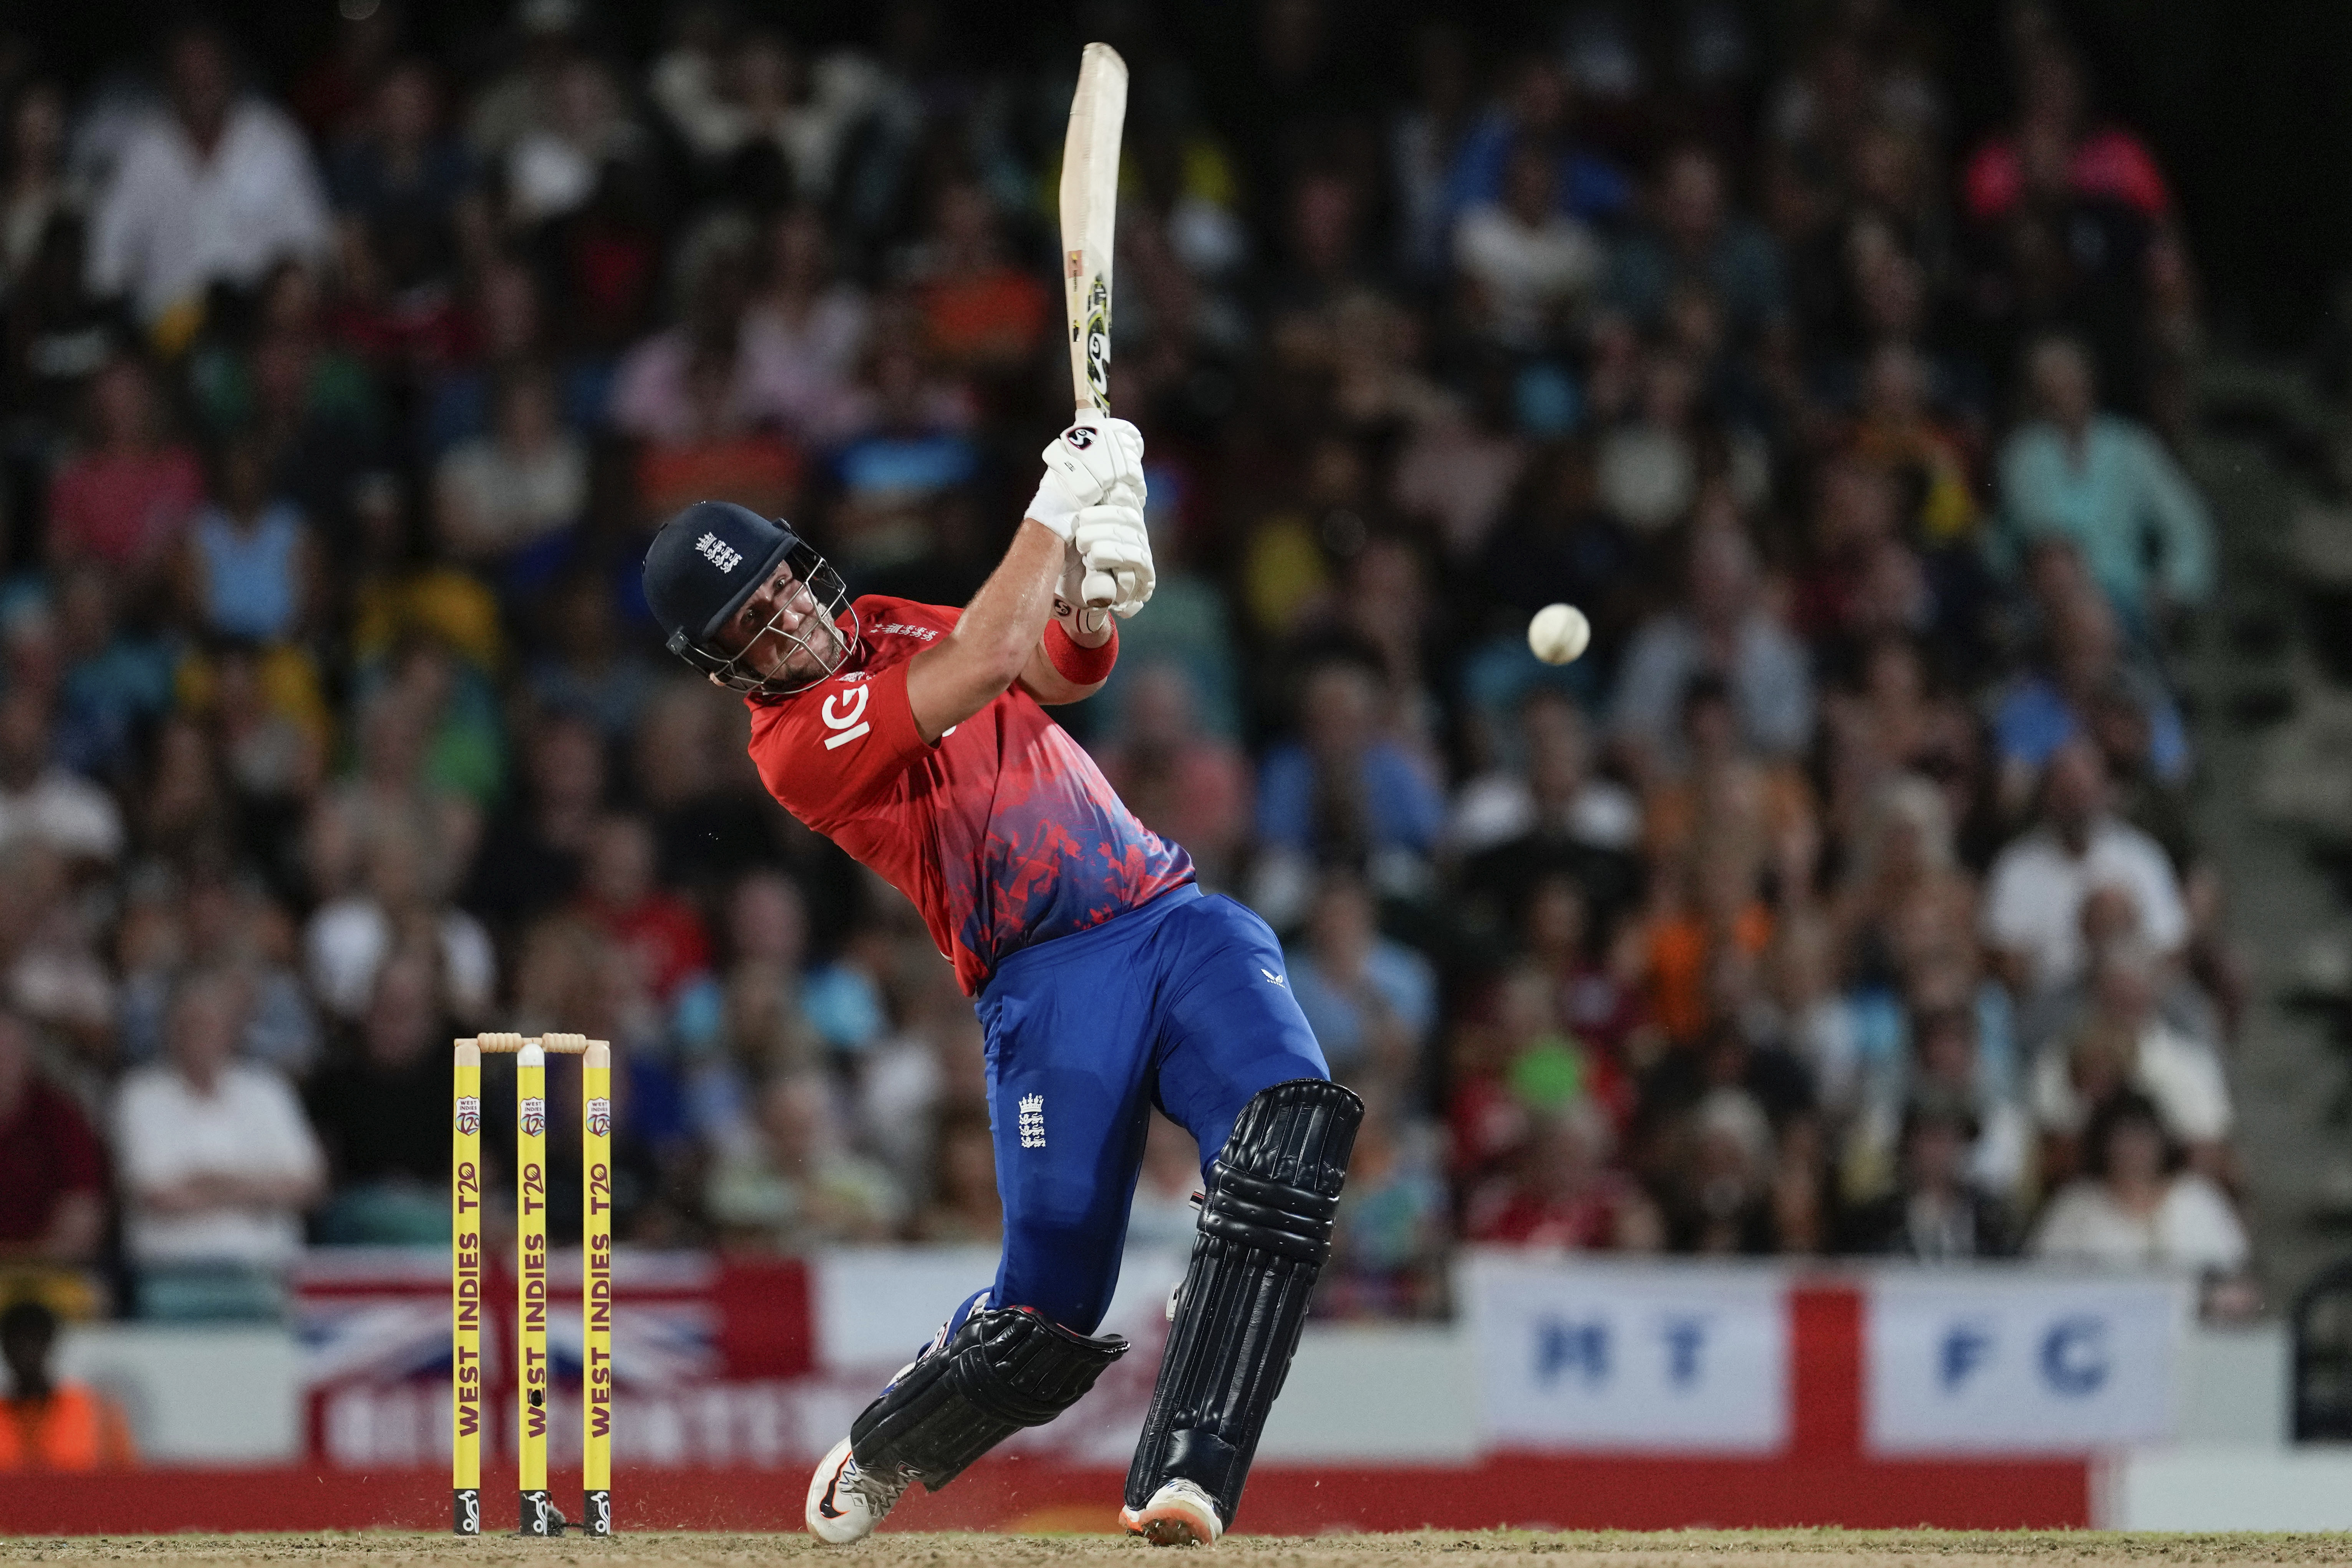 Liam Livingstone thumped 30 off 18 balls for England in their win over the West Indies on Saturday (Ricardo Mazalan/AP)